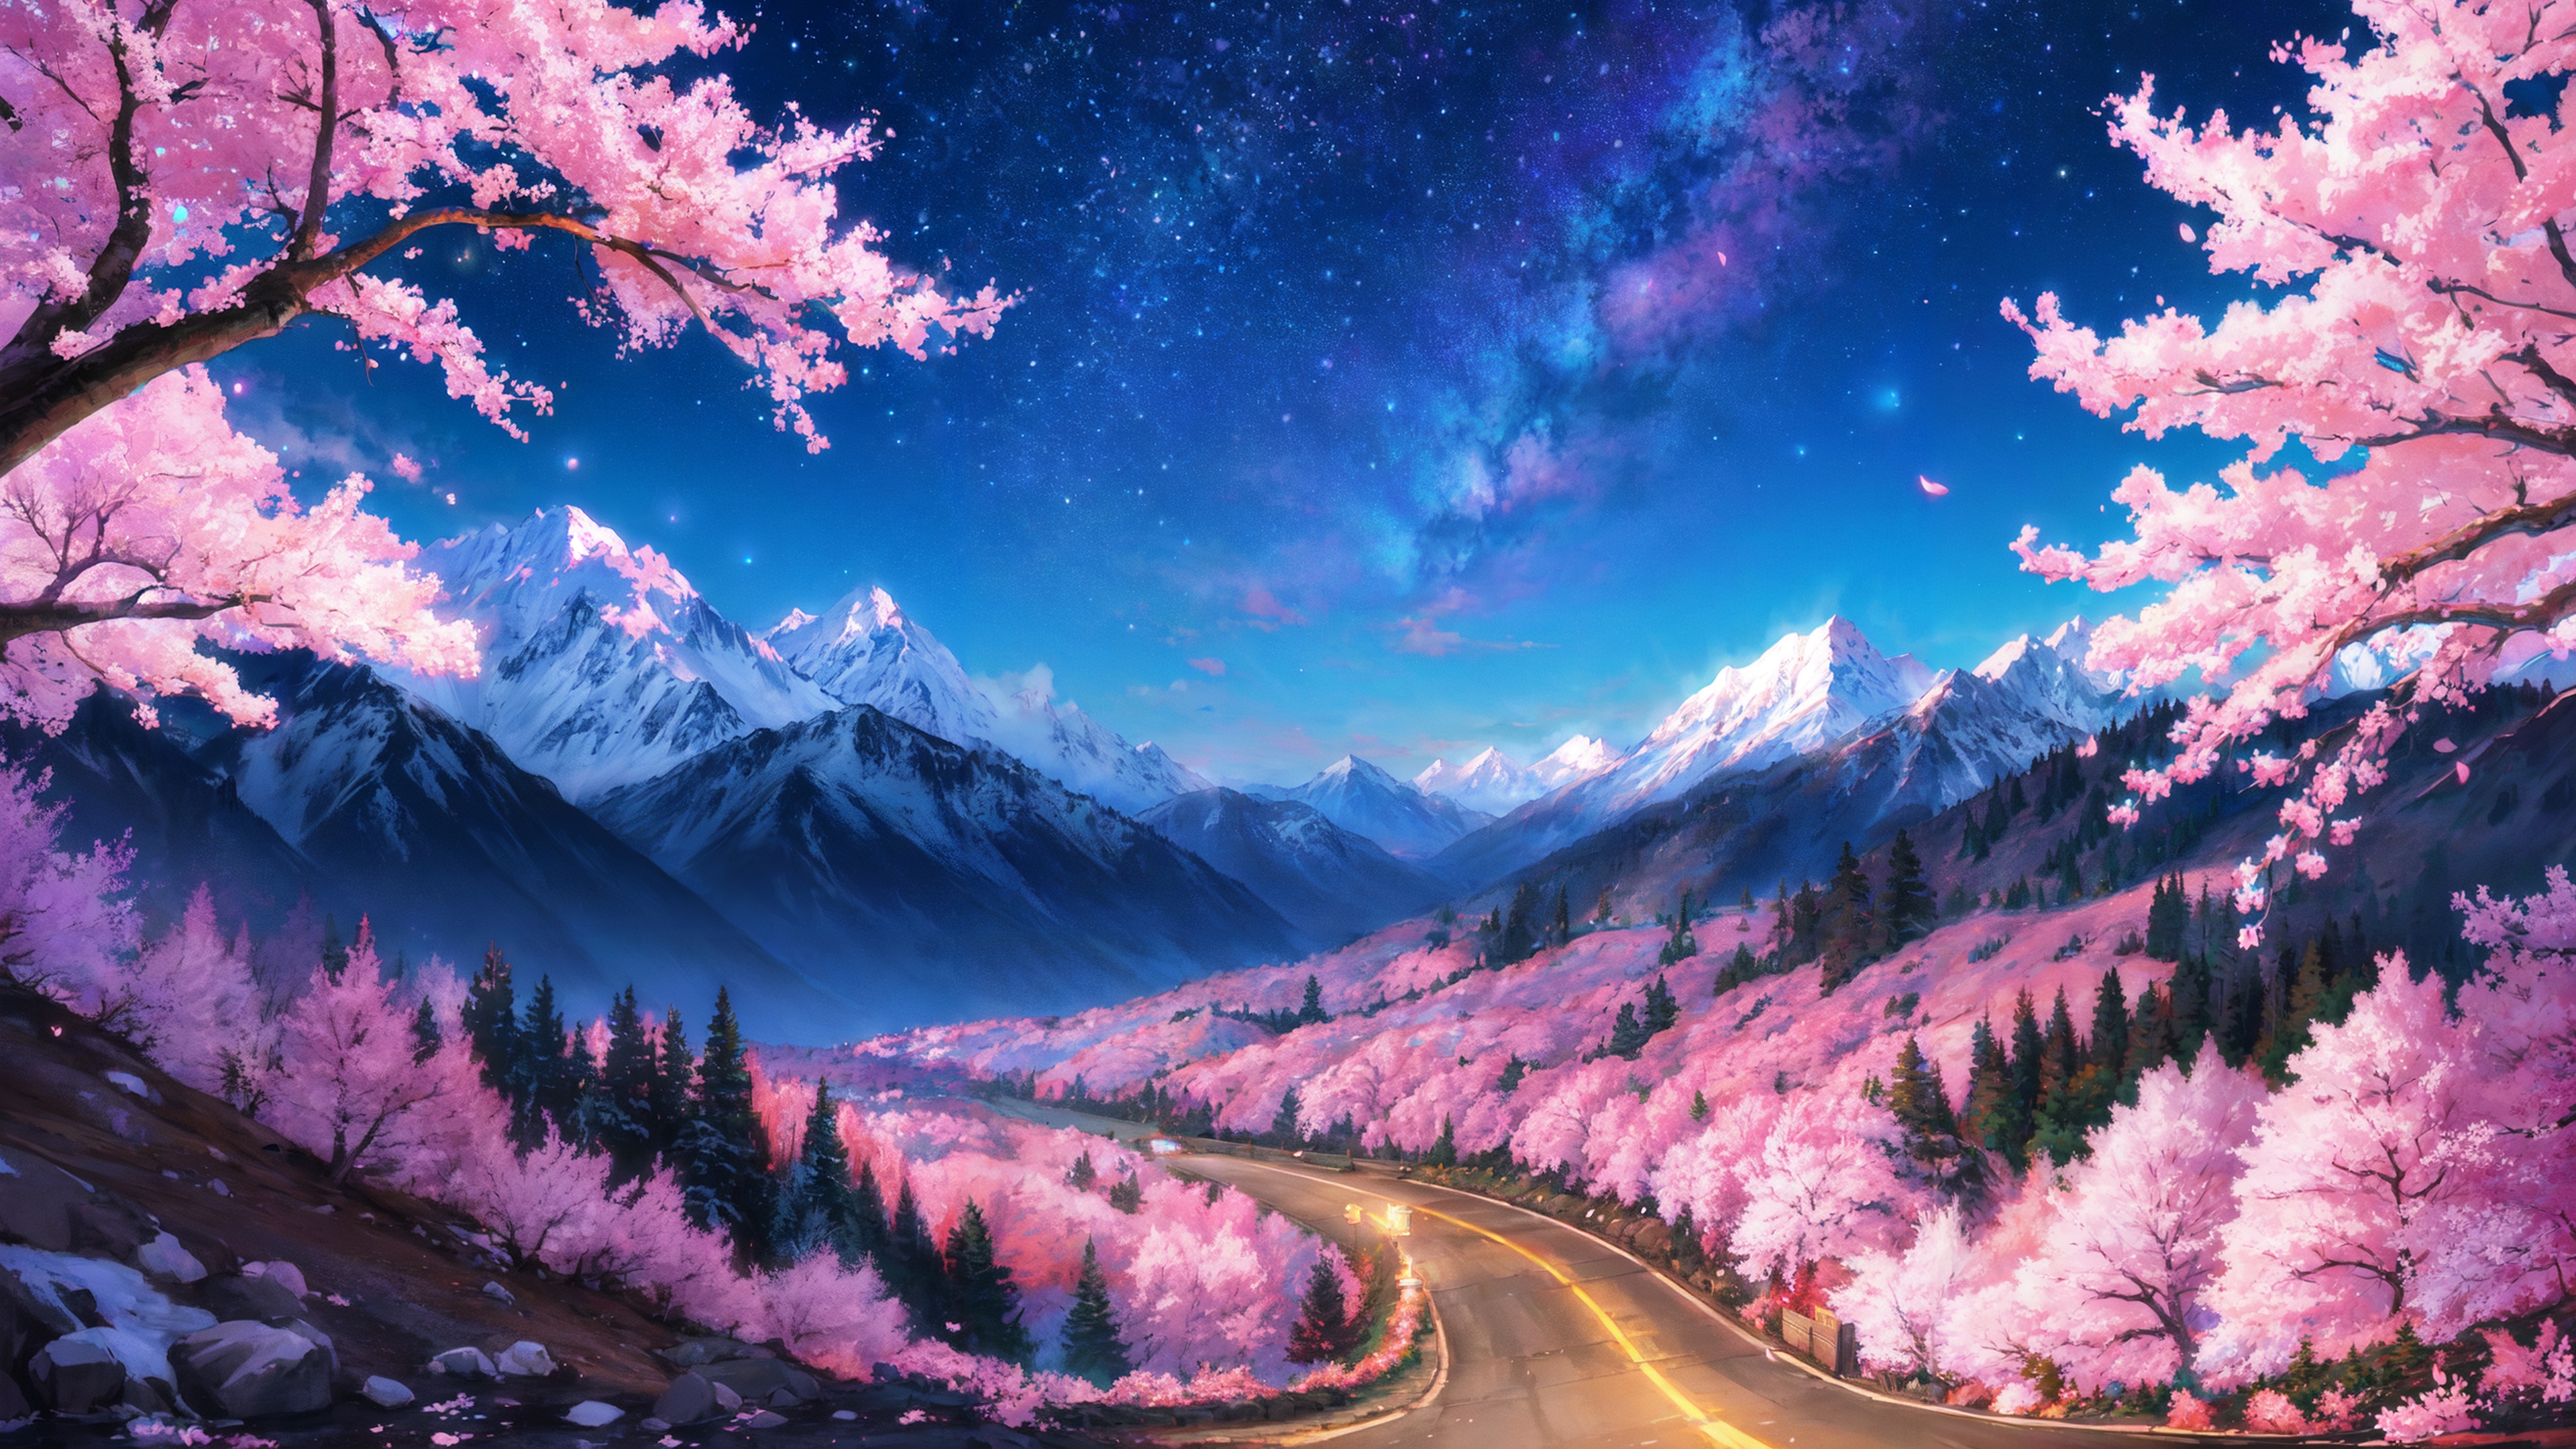 Fantasy landscape with mountains and pink trees